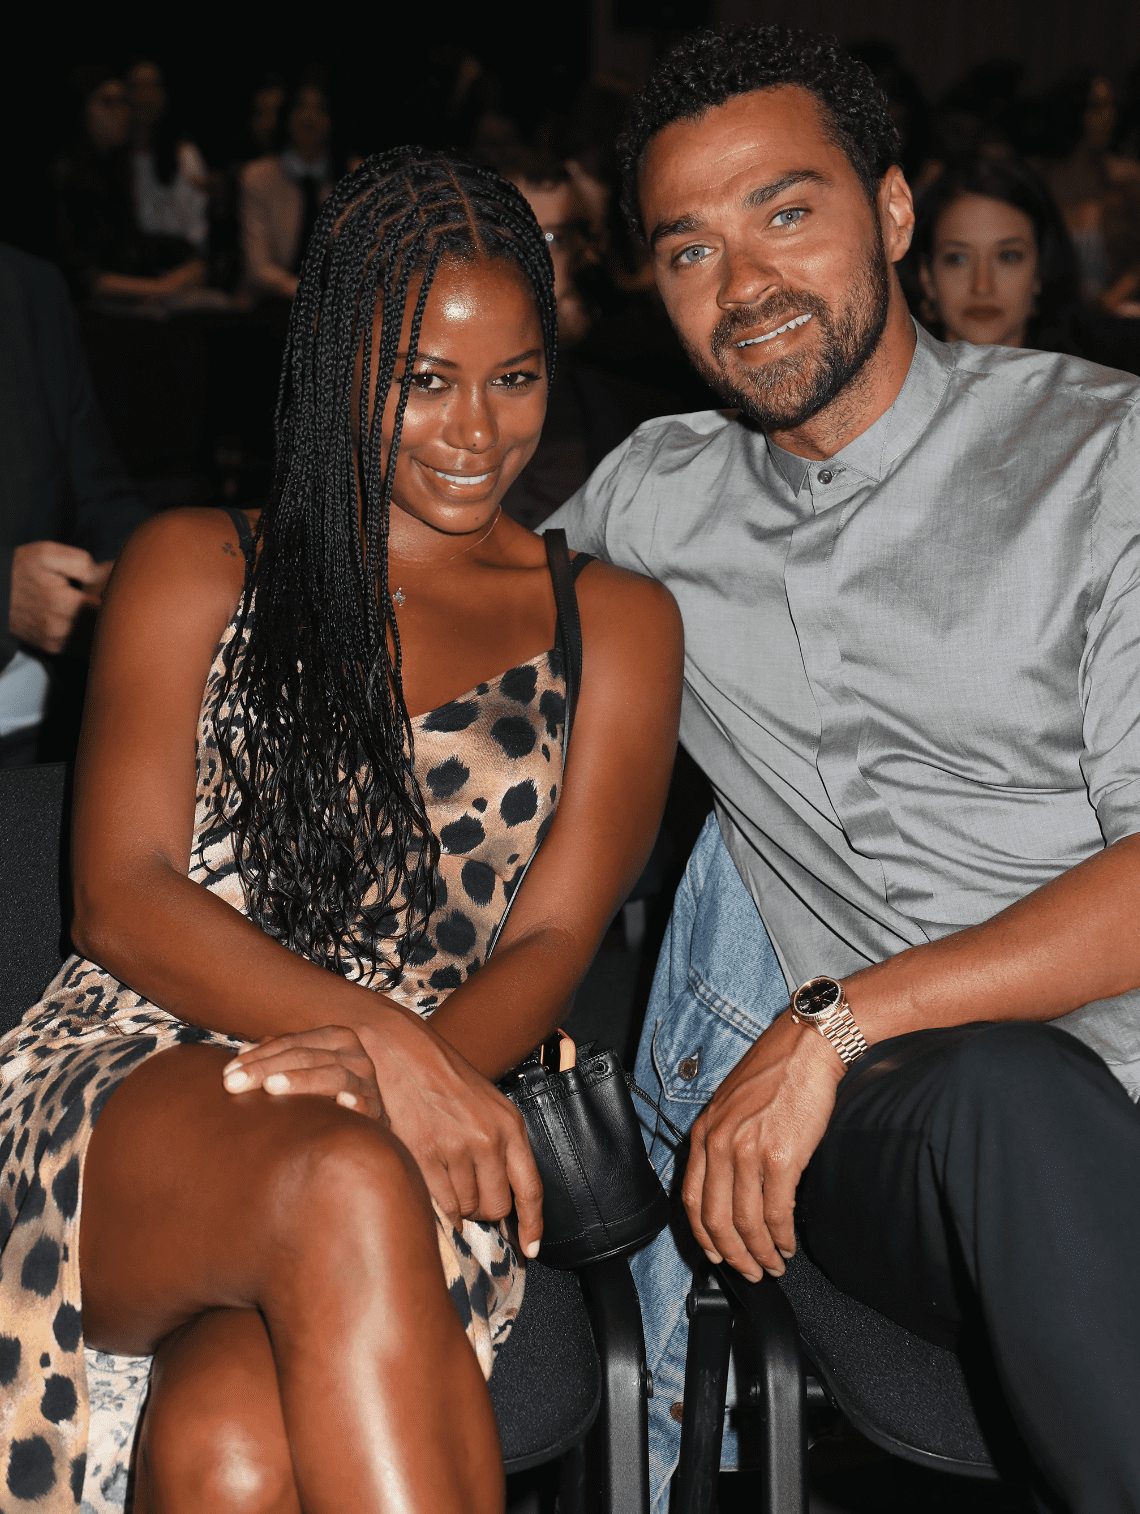 Taylour Paige and Jesse Williams attend the Filming Italy Sardegna Festival 2019 Day 2 at Forte Village Resort on June 14, 2019. | Photo: Getty Images